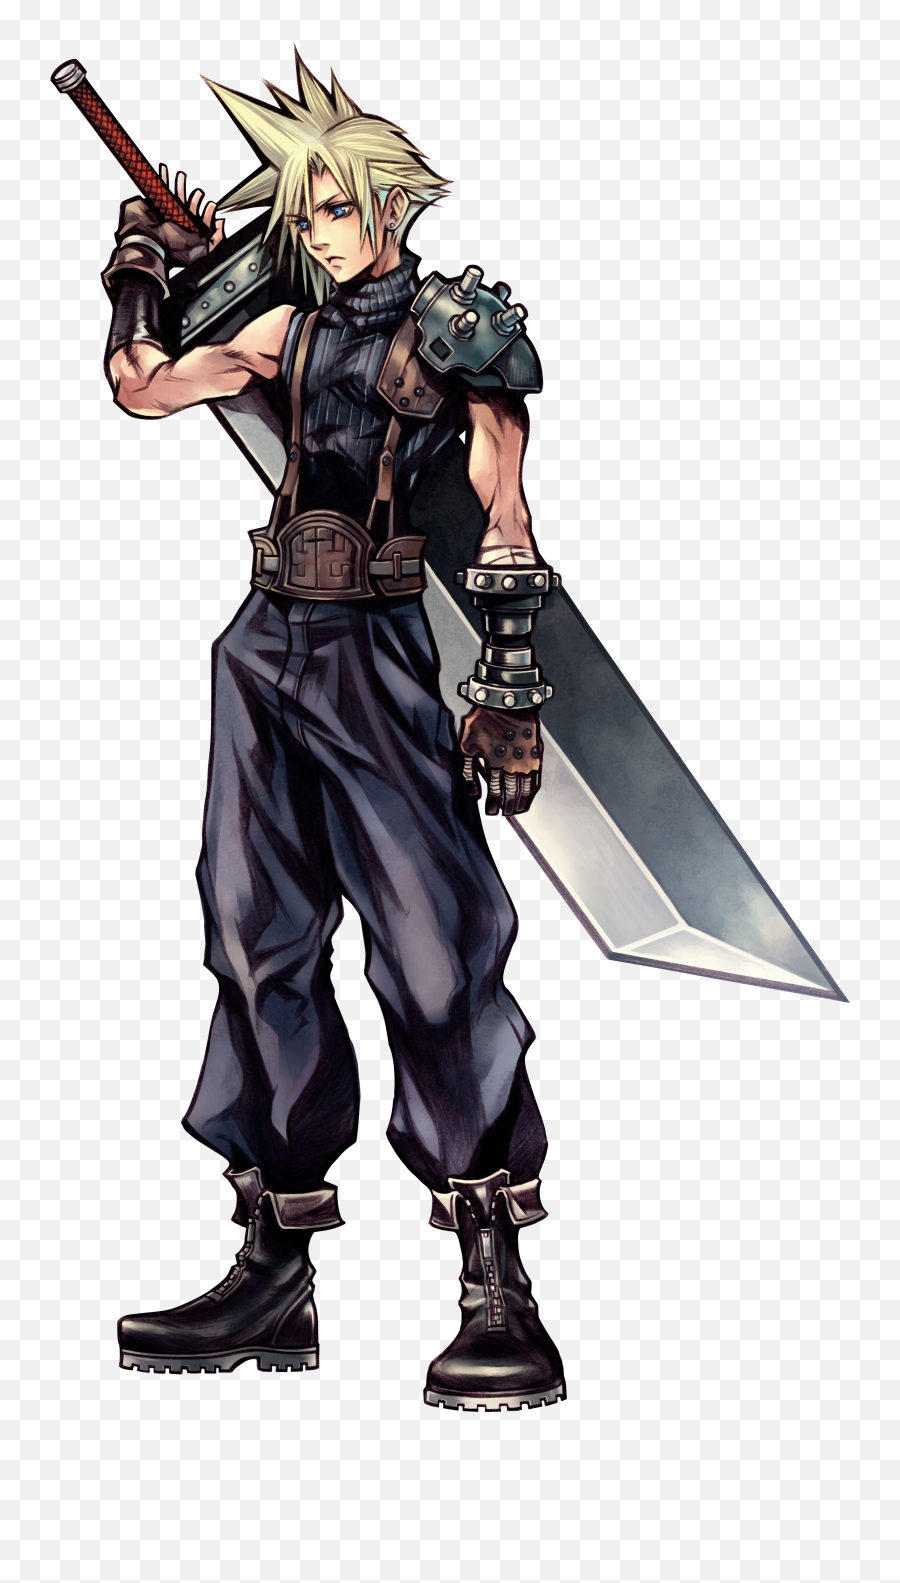 Cloud Is Not An Emo - Cloud Final Fantasy Emoji,Anime Where The Main Character Has No Emotions